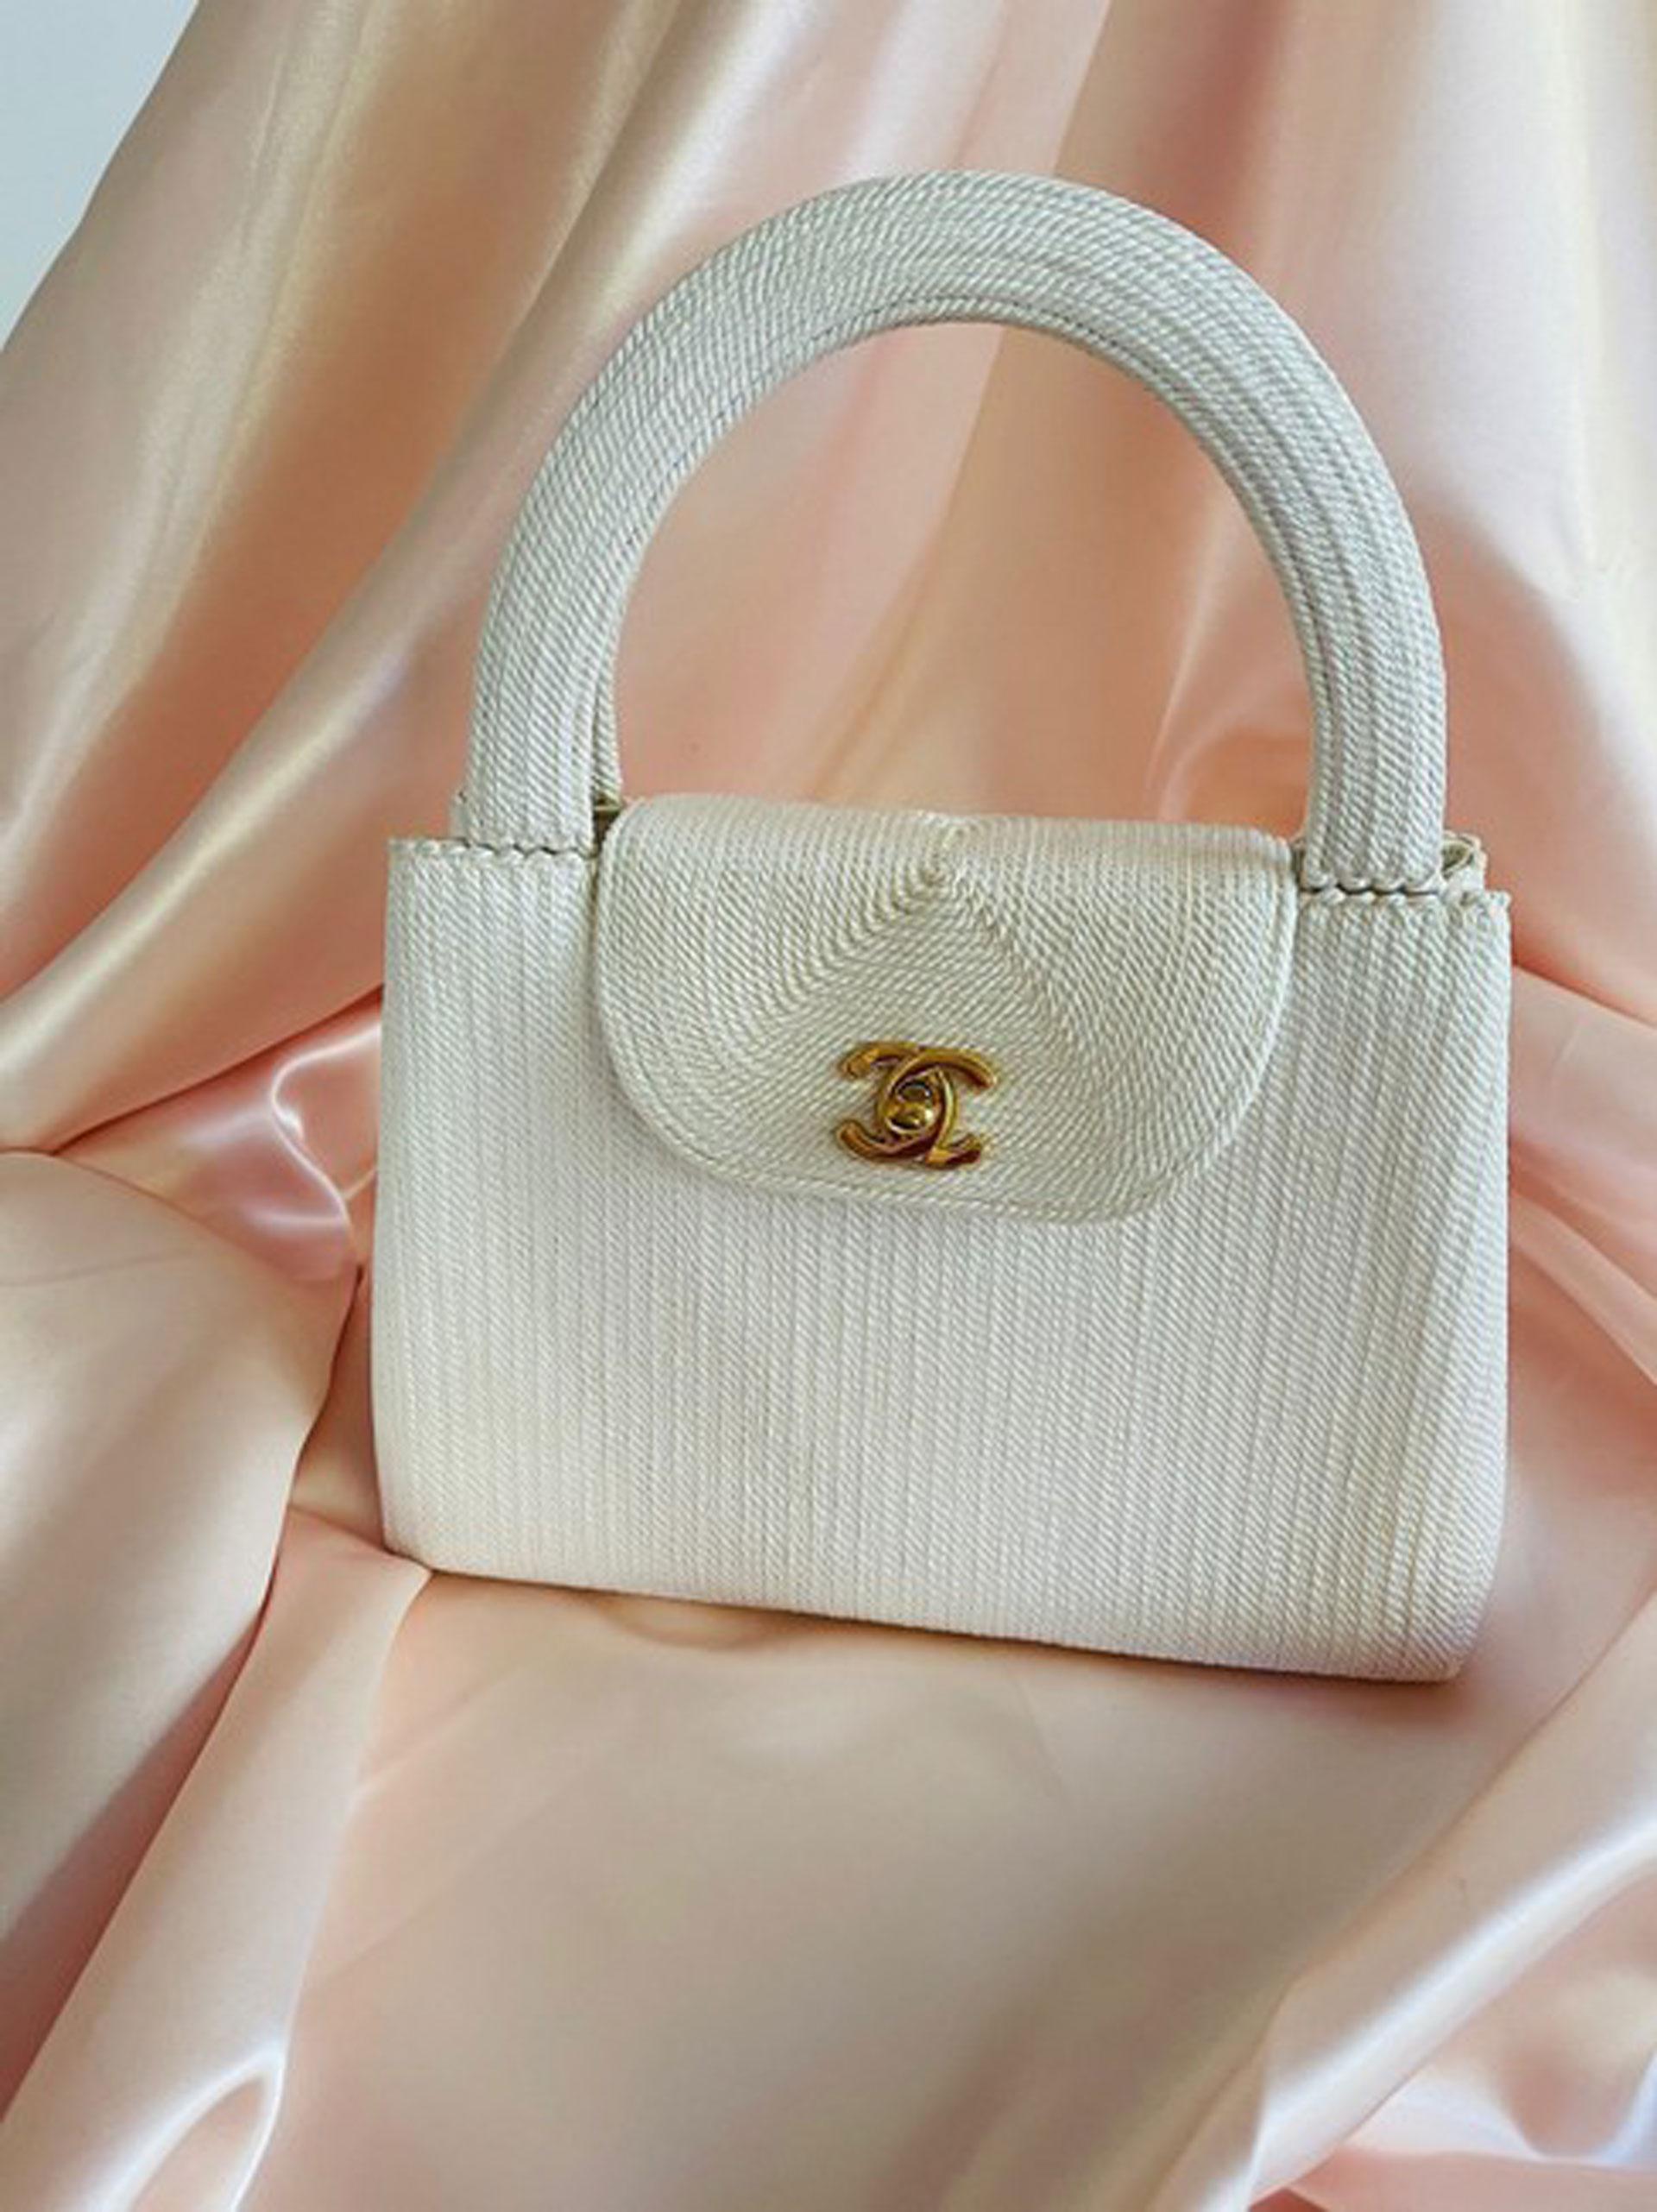 Chanel 1997 Rare Woven Silk Vintage Top Handle Off White Beige Kelly Flap Bag  For Sale 1